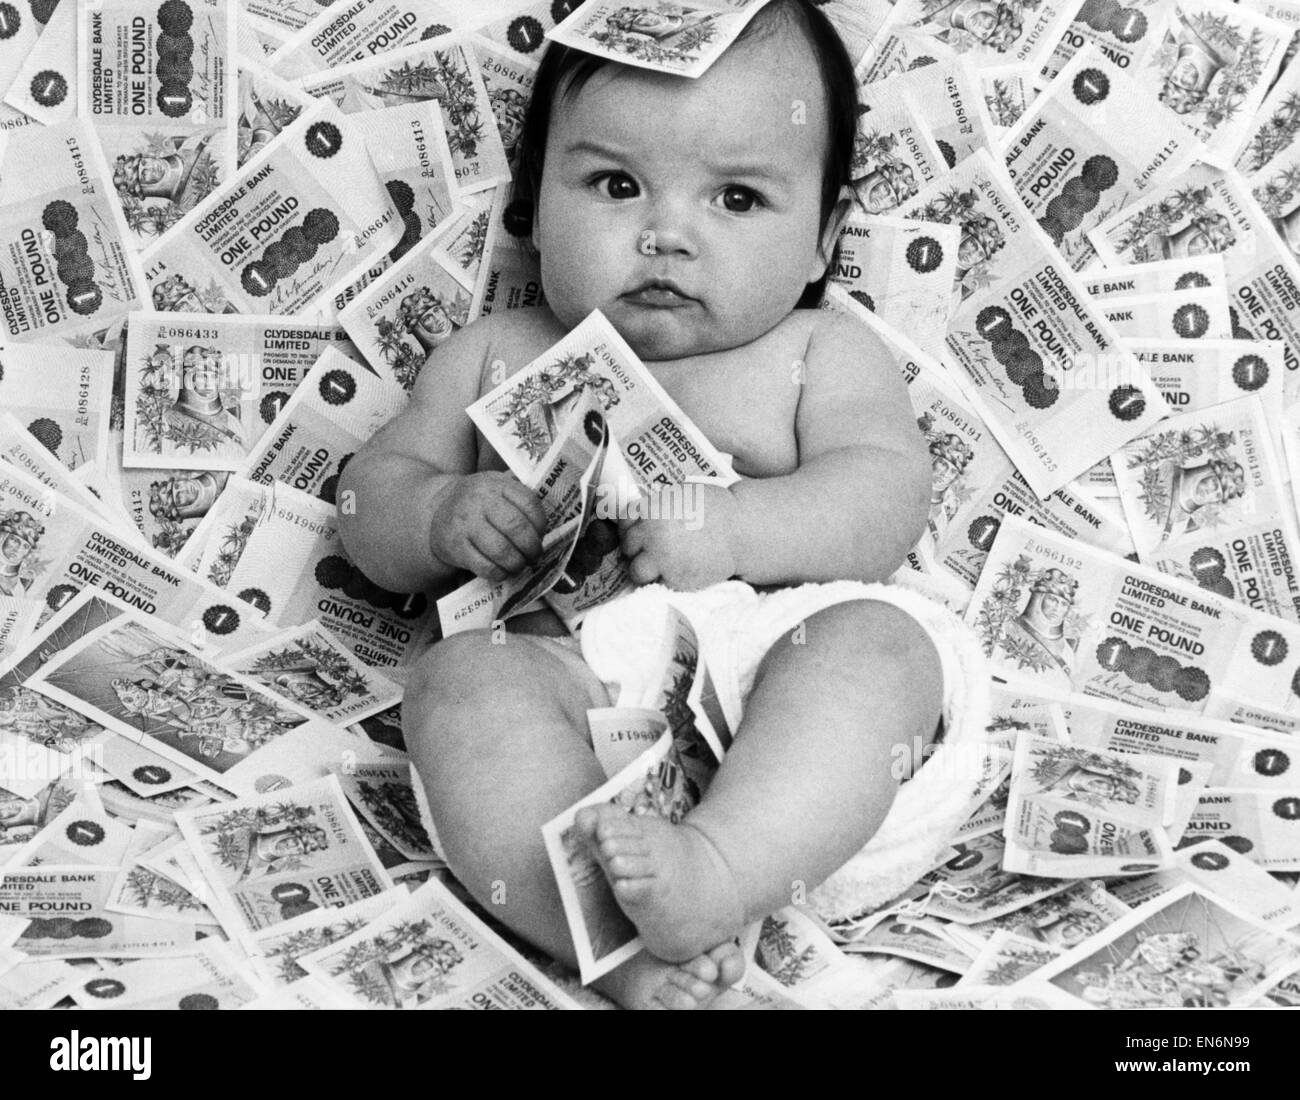 Baby Diane from Glasgow, Scotland, surrounded by bank notes from Clydesdale Bank Limited, September 1977. Stock Photo